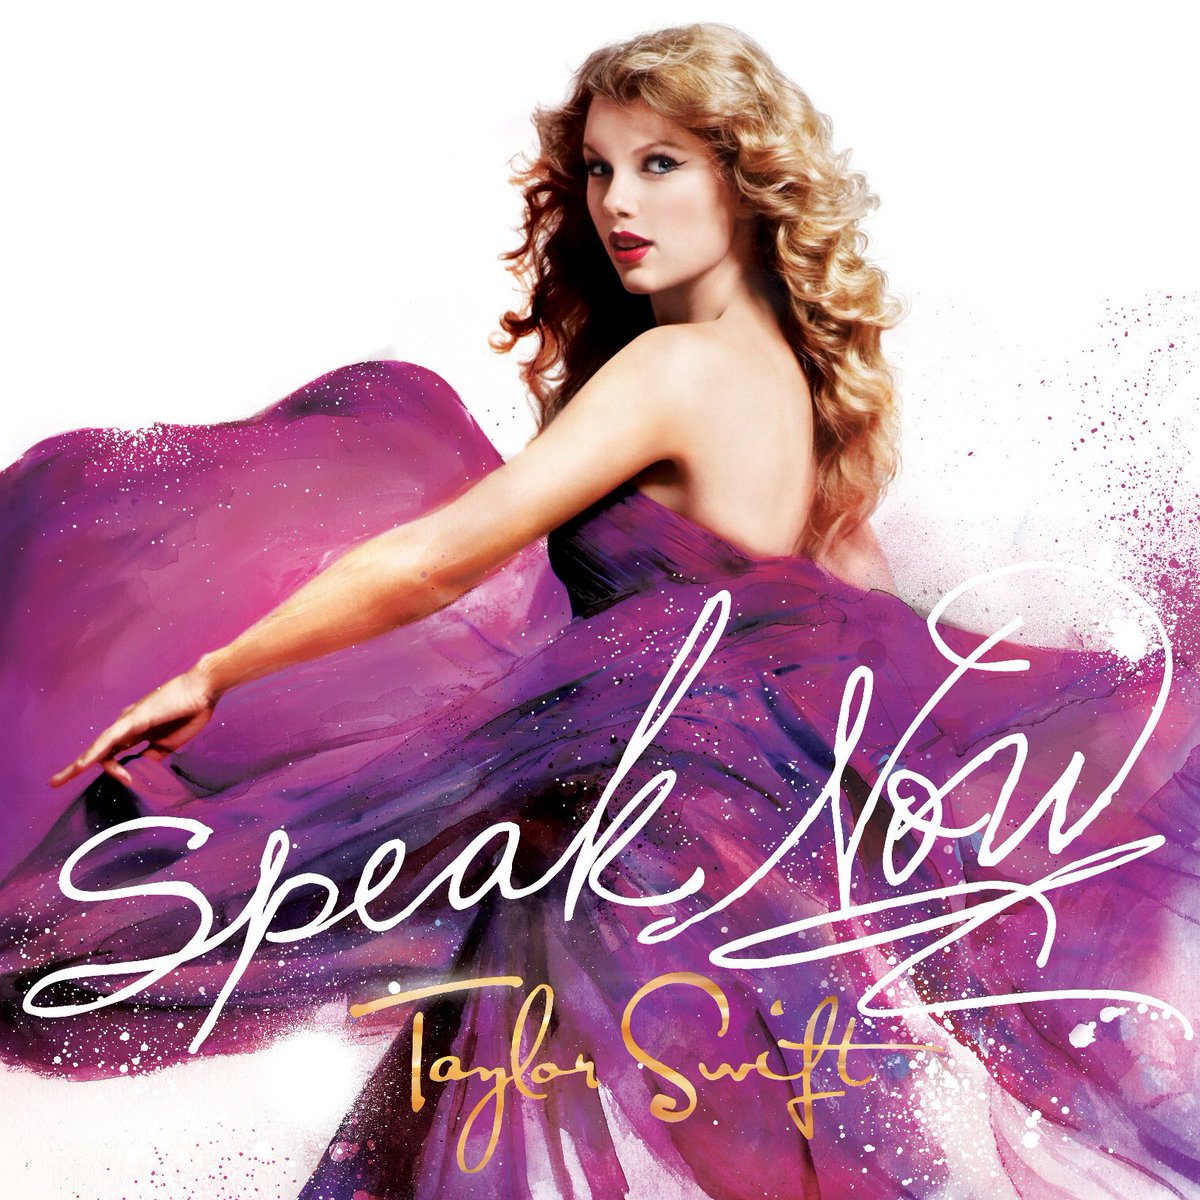 Fastest-selling digital album in the USA by a female artistFor the week ending 13 November 2010, the album Speak Now by Taylor Swift (USA) sold a record 278,000 digital downloads.